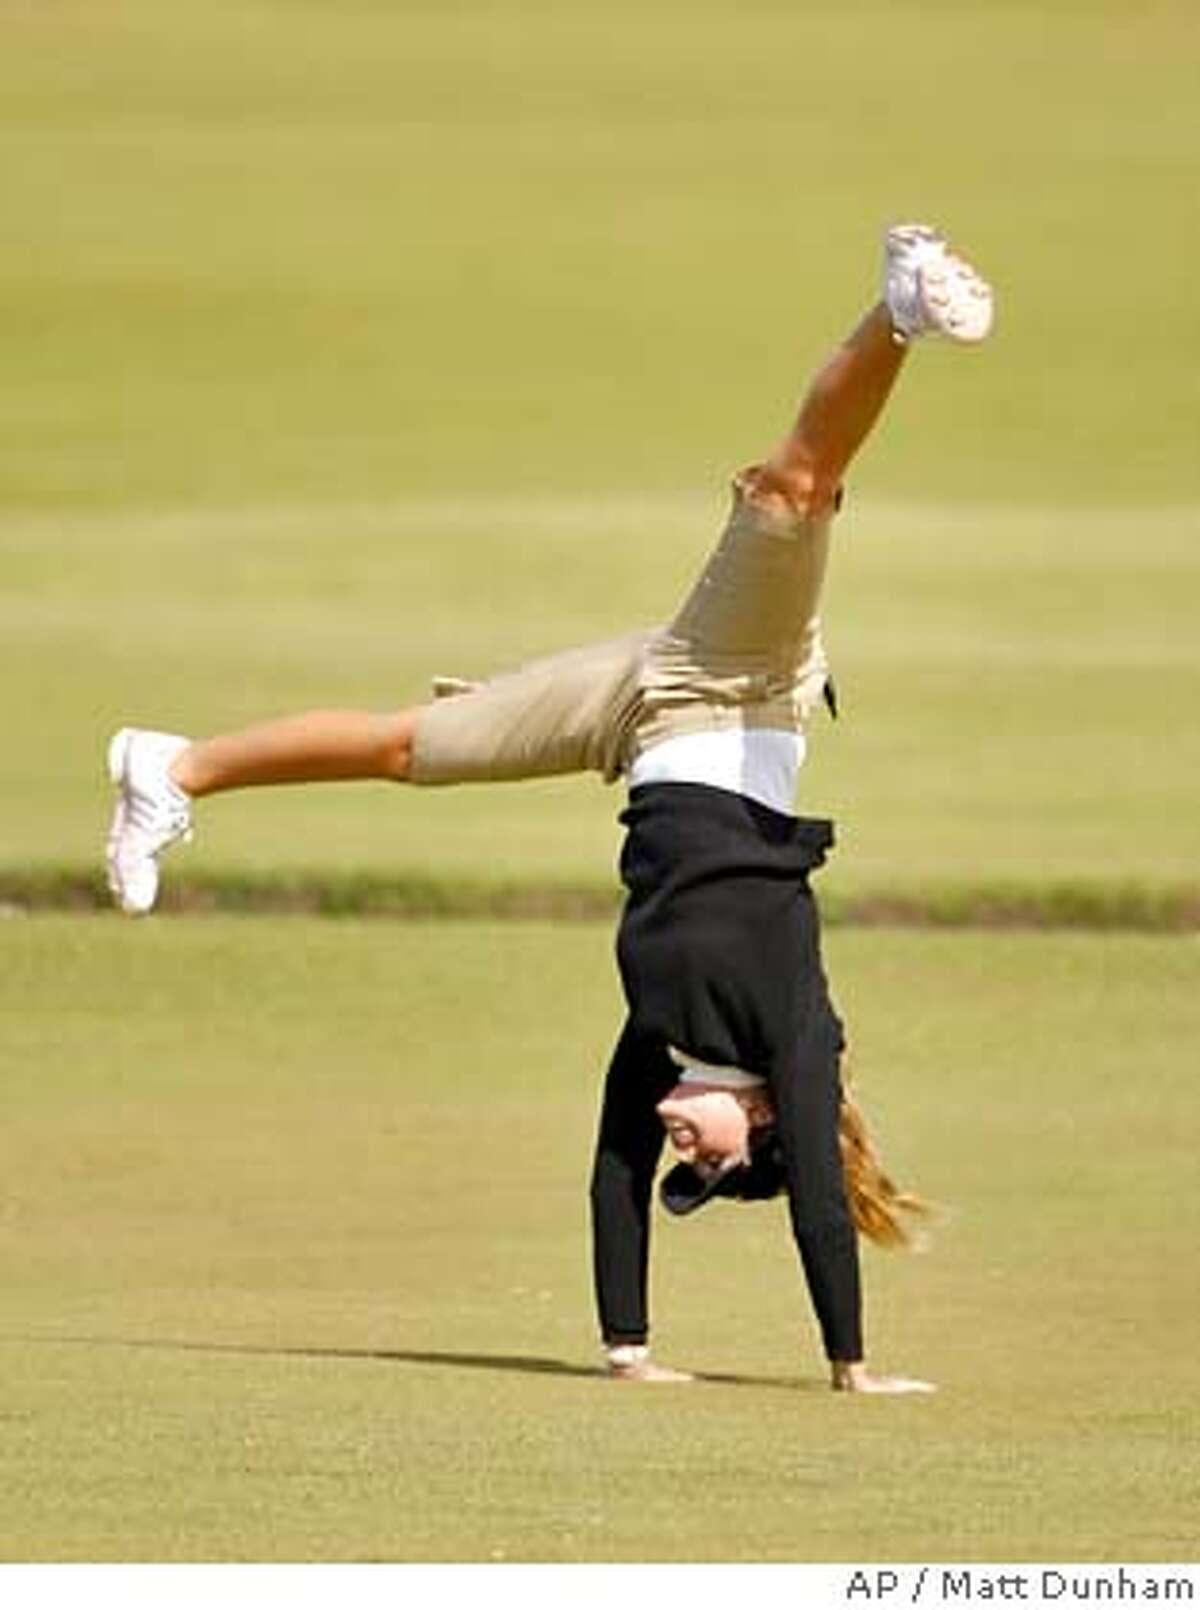 Paula Creamer of the U.S. performs a cartwheel on the 18th hole as she poses for a photographer after a Pro Am event ahead of the Women's British Open golf tournament at the Old Course at the Royal and Ancient Golf Club in St Andrews, Scotland, Wednesday, Aug. 1, 2007. The tournament begins on Thursday. (AP Photo/Matt Dunham) ** EDITORIAL USE ONLY ** EDITORIAL USE ONLY